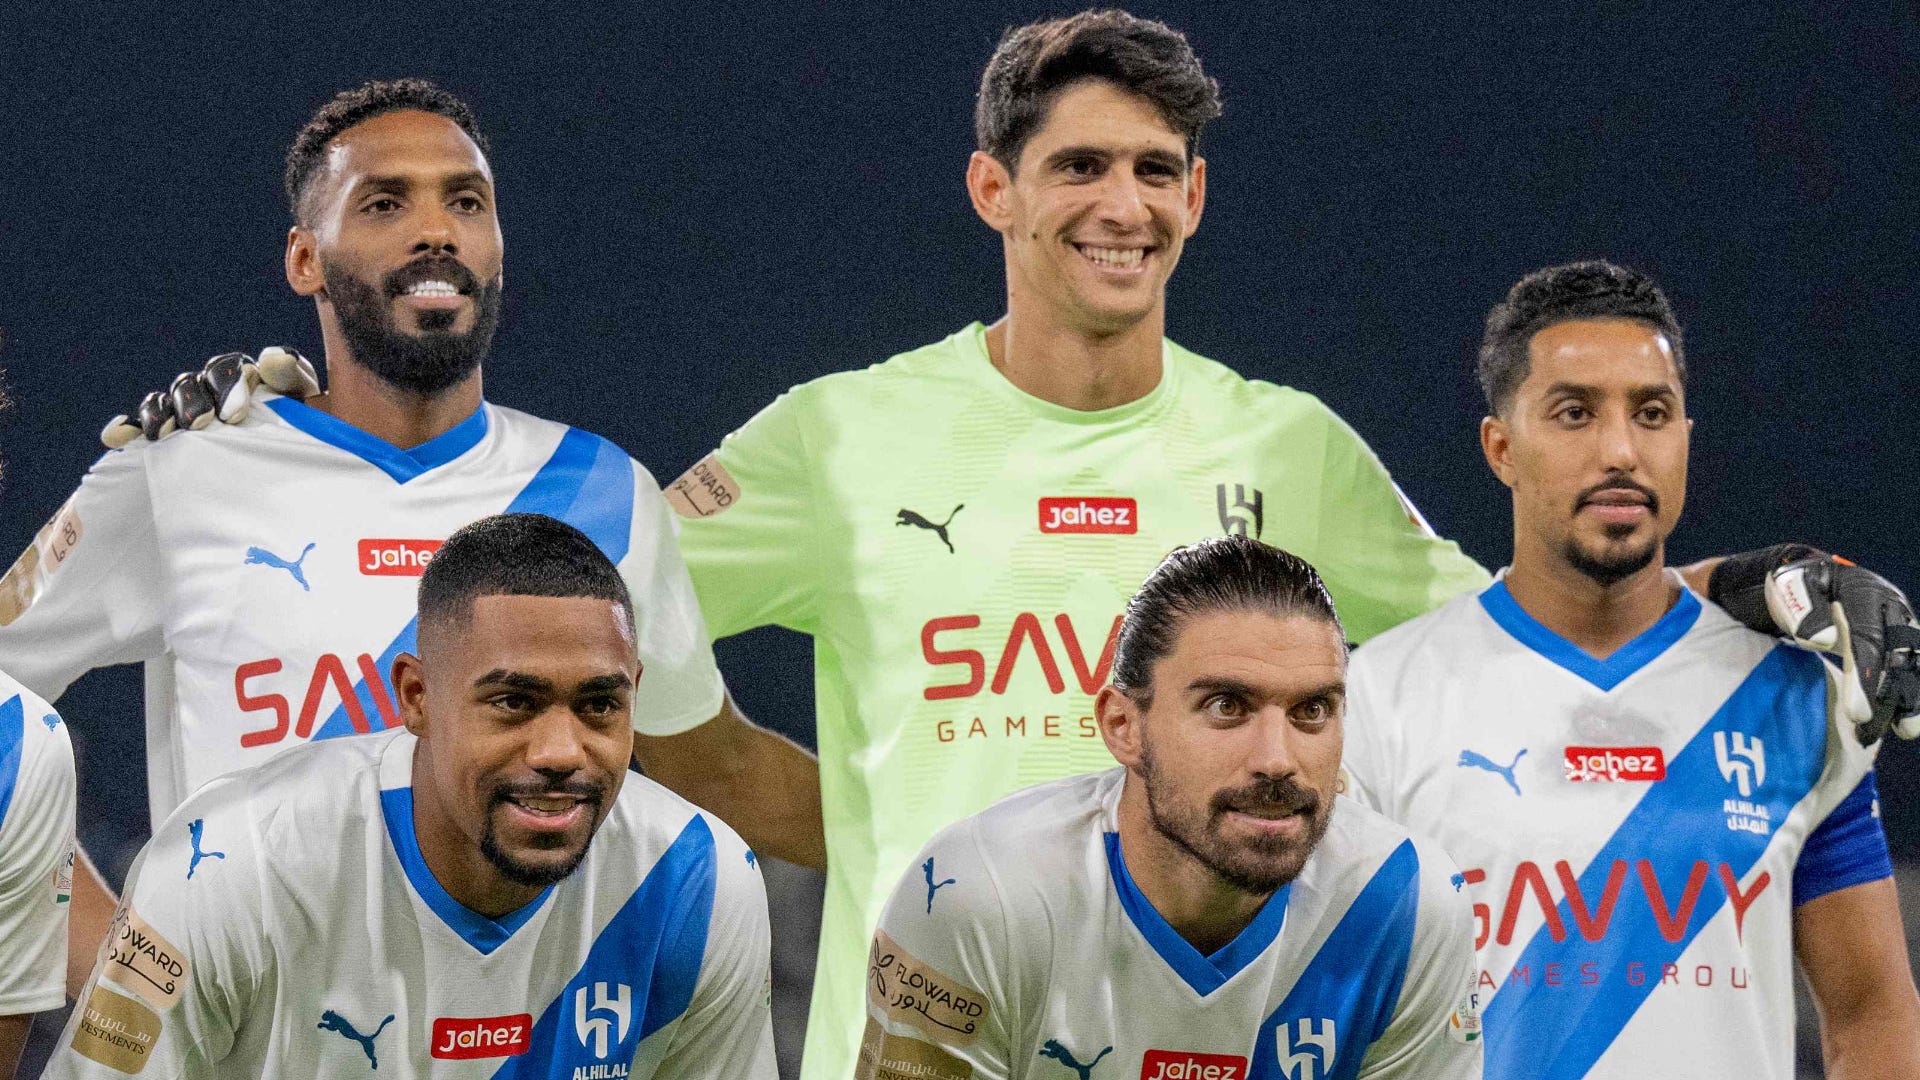 Hilal vs Ittifaq Where to watch the match online, live stream, TV channels, and kick-off time Goal US